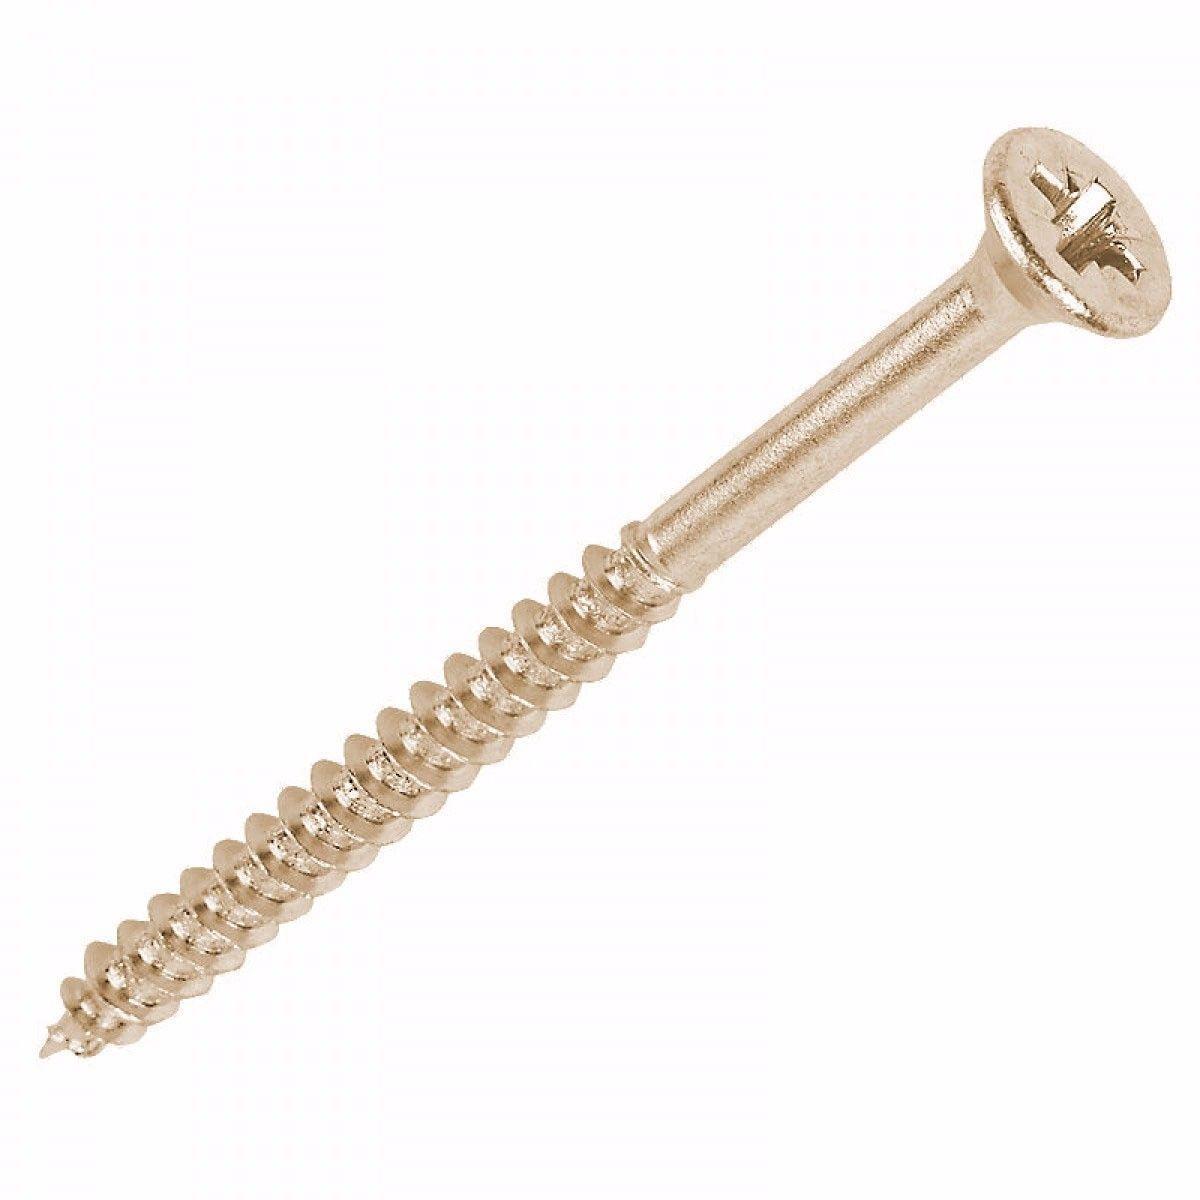 5.0 X 80 Pozi Countersunk Hardened Chipboard Wood Screws Yellow Plated DIY 0362 (Large Letter Rate)